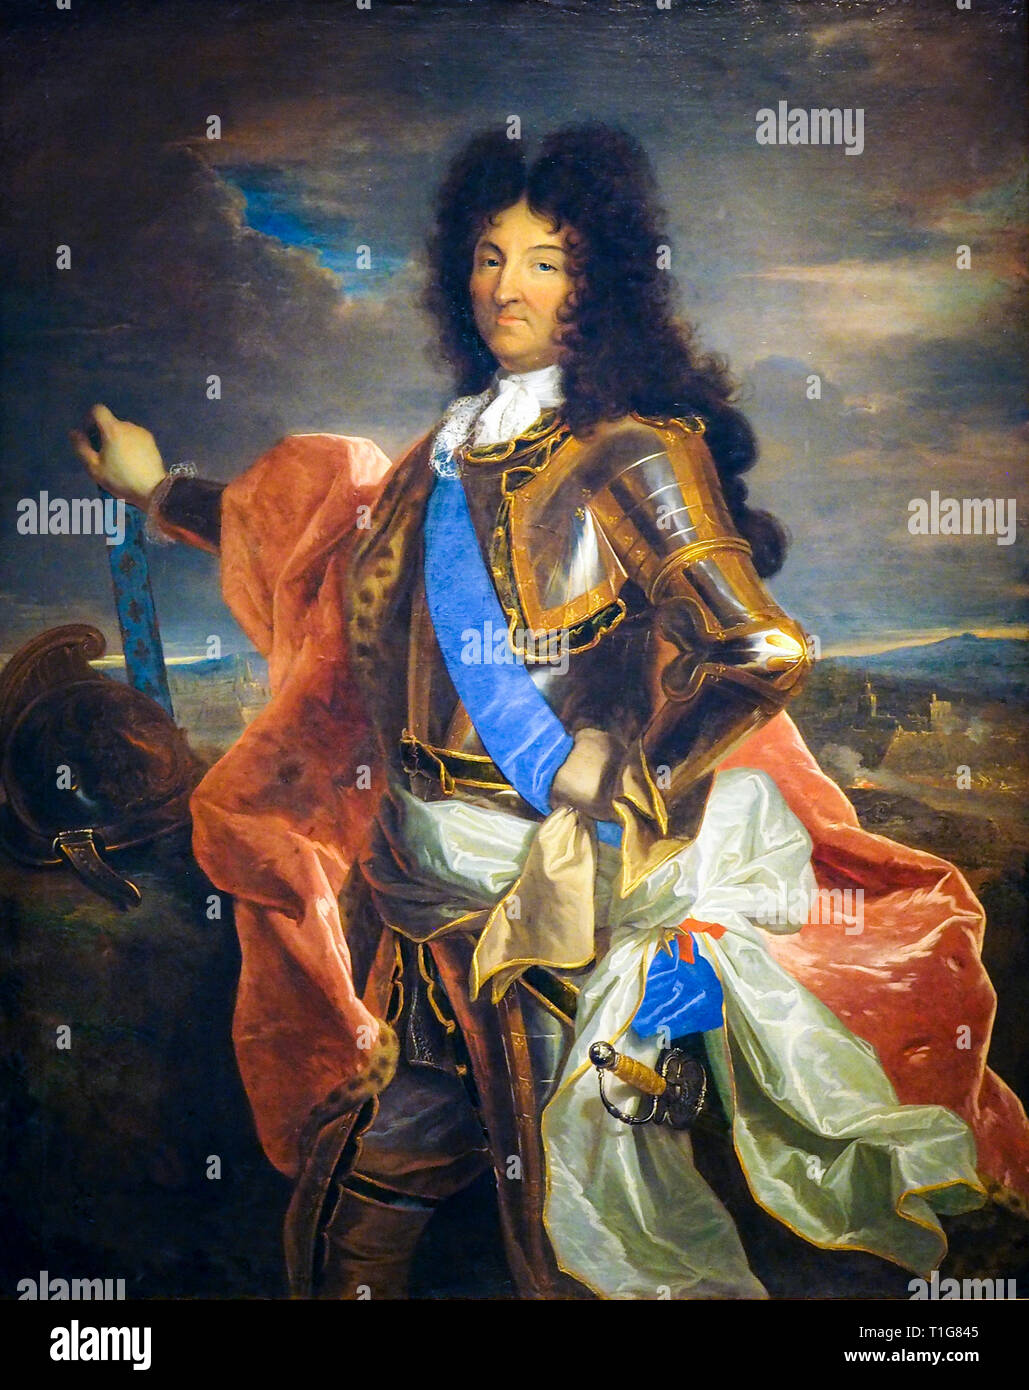 King Louis XIV of France (1638-1715), portrait painting in armour